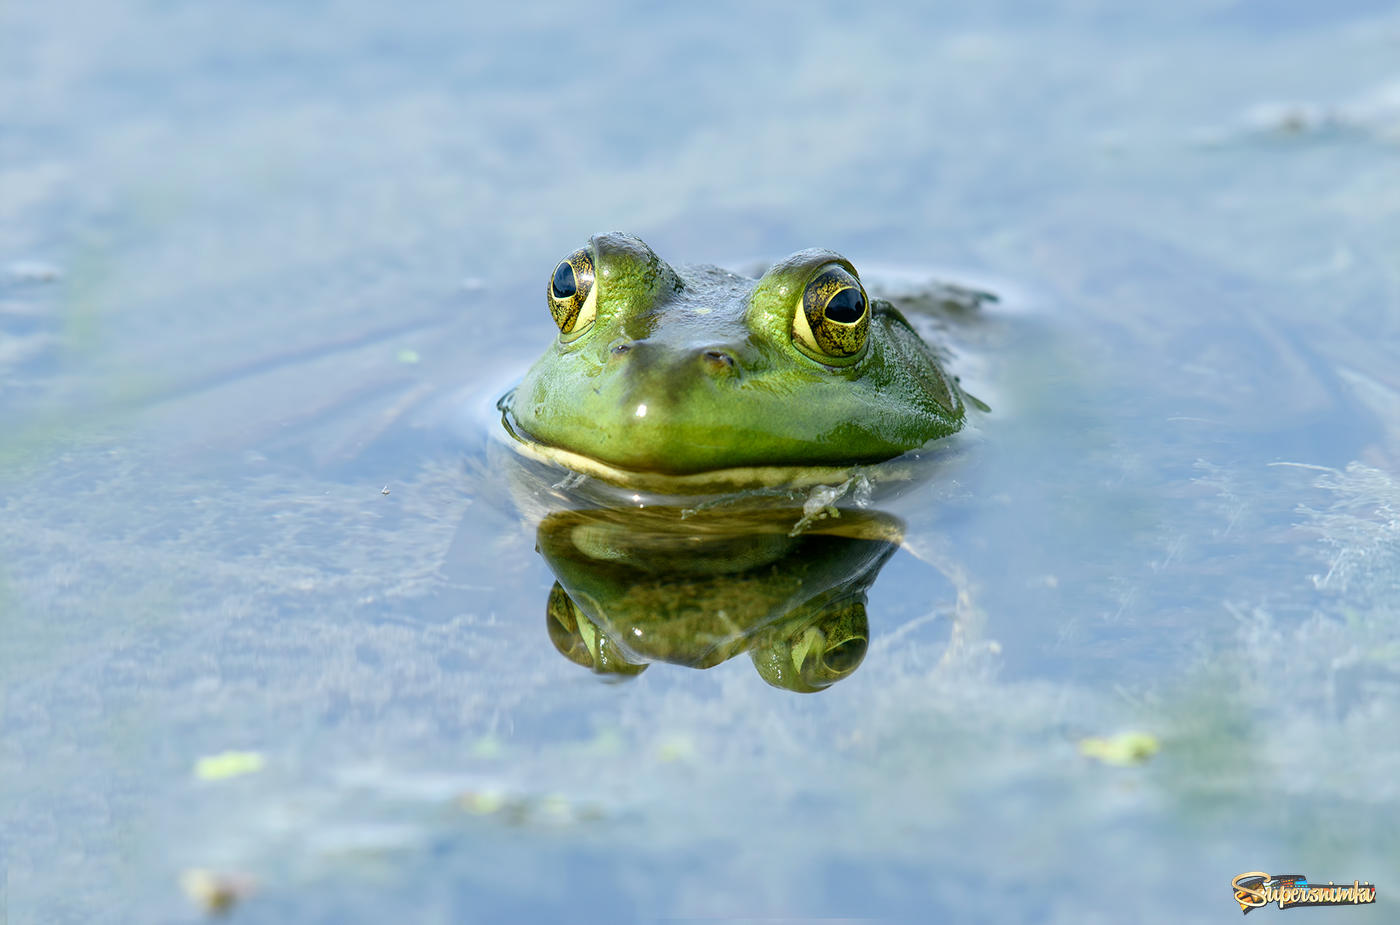 The green frog -Lithobates clamitans